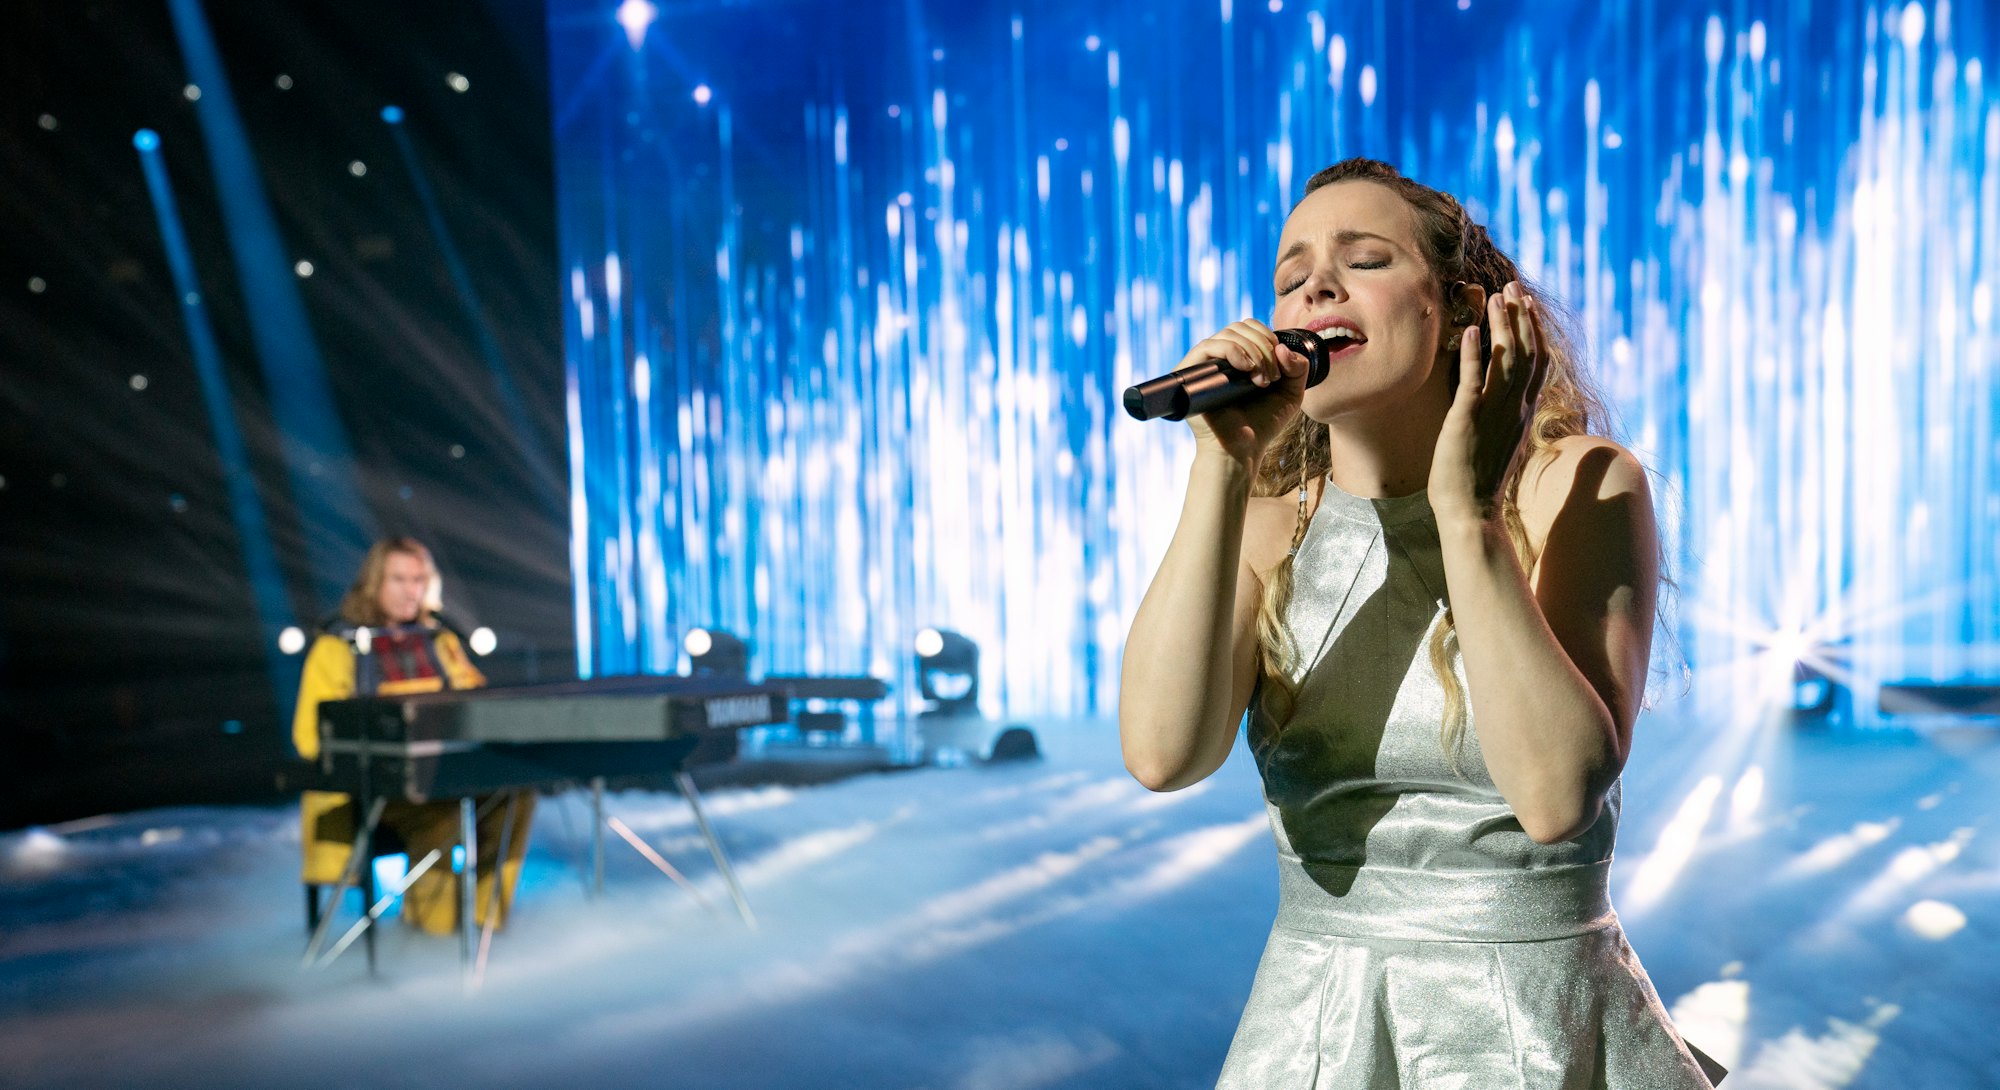 Rachel McAdams plays Sigrit in Eurovision Contest: The Story of Fire Saga. But Sigrit's singing voic...